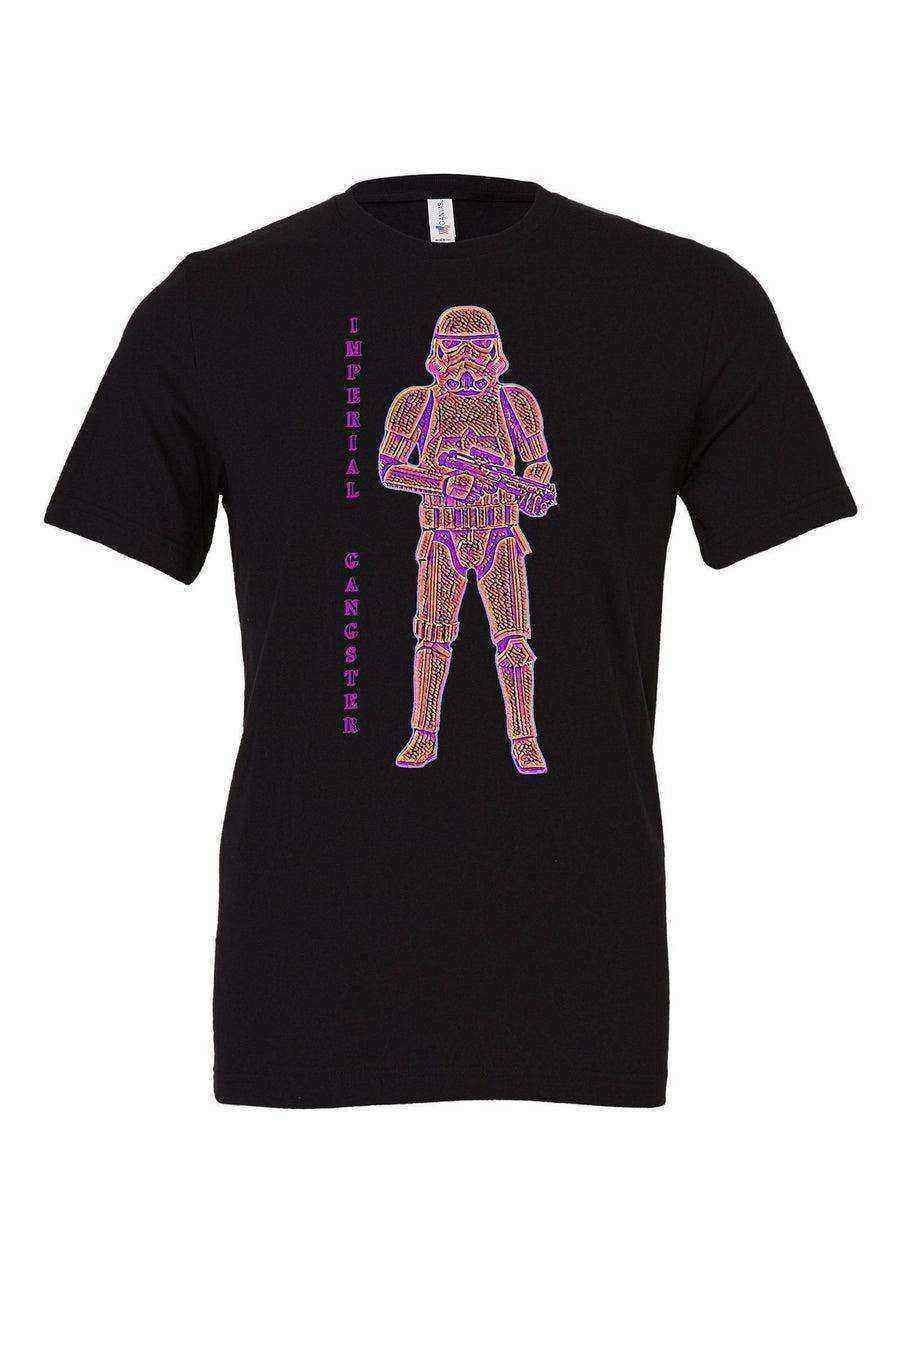 Womens | Imperial Gangster | Star Wars - Dylan's Tees